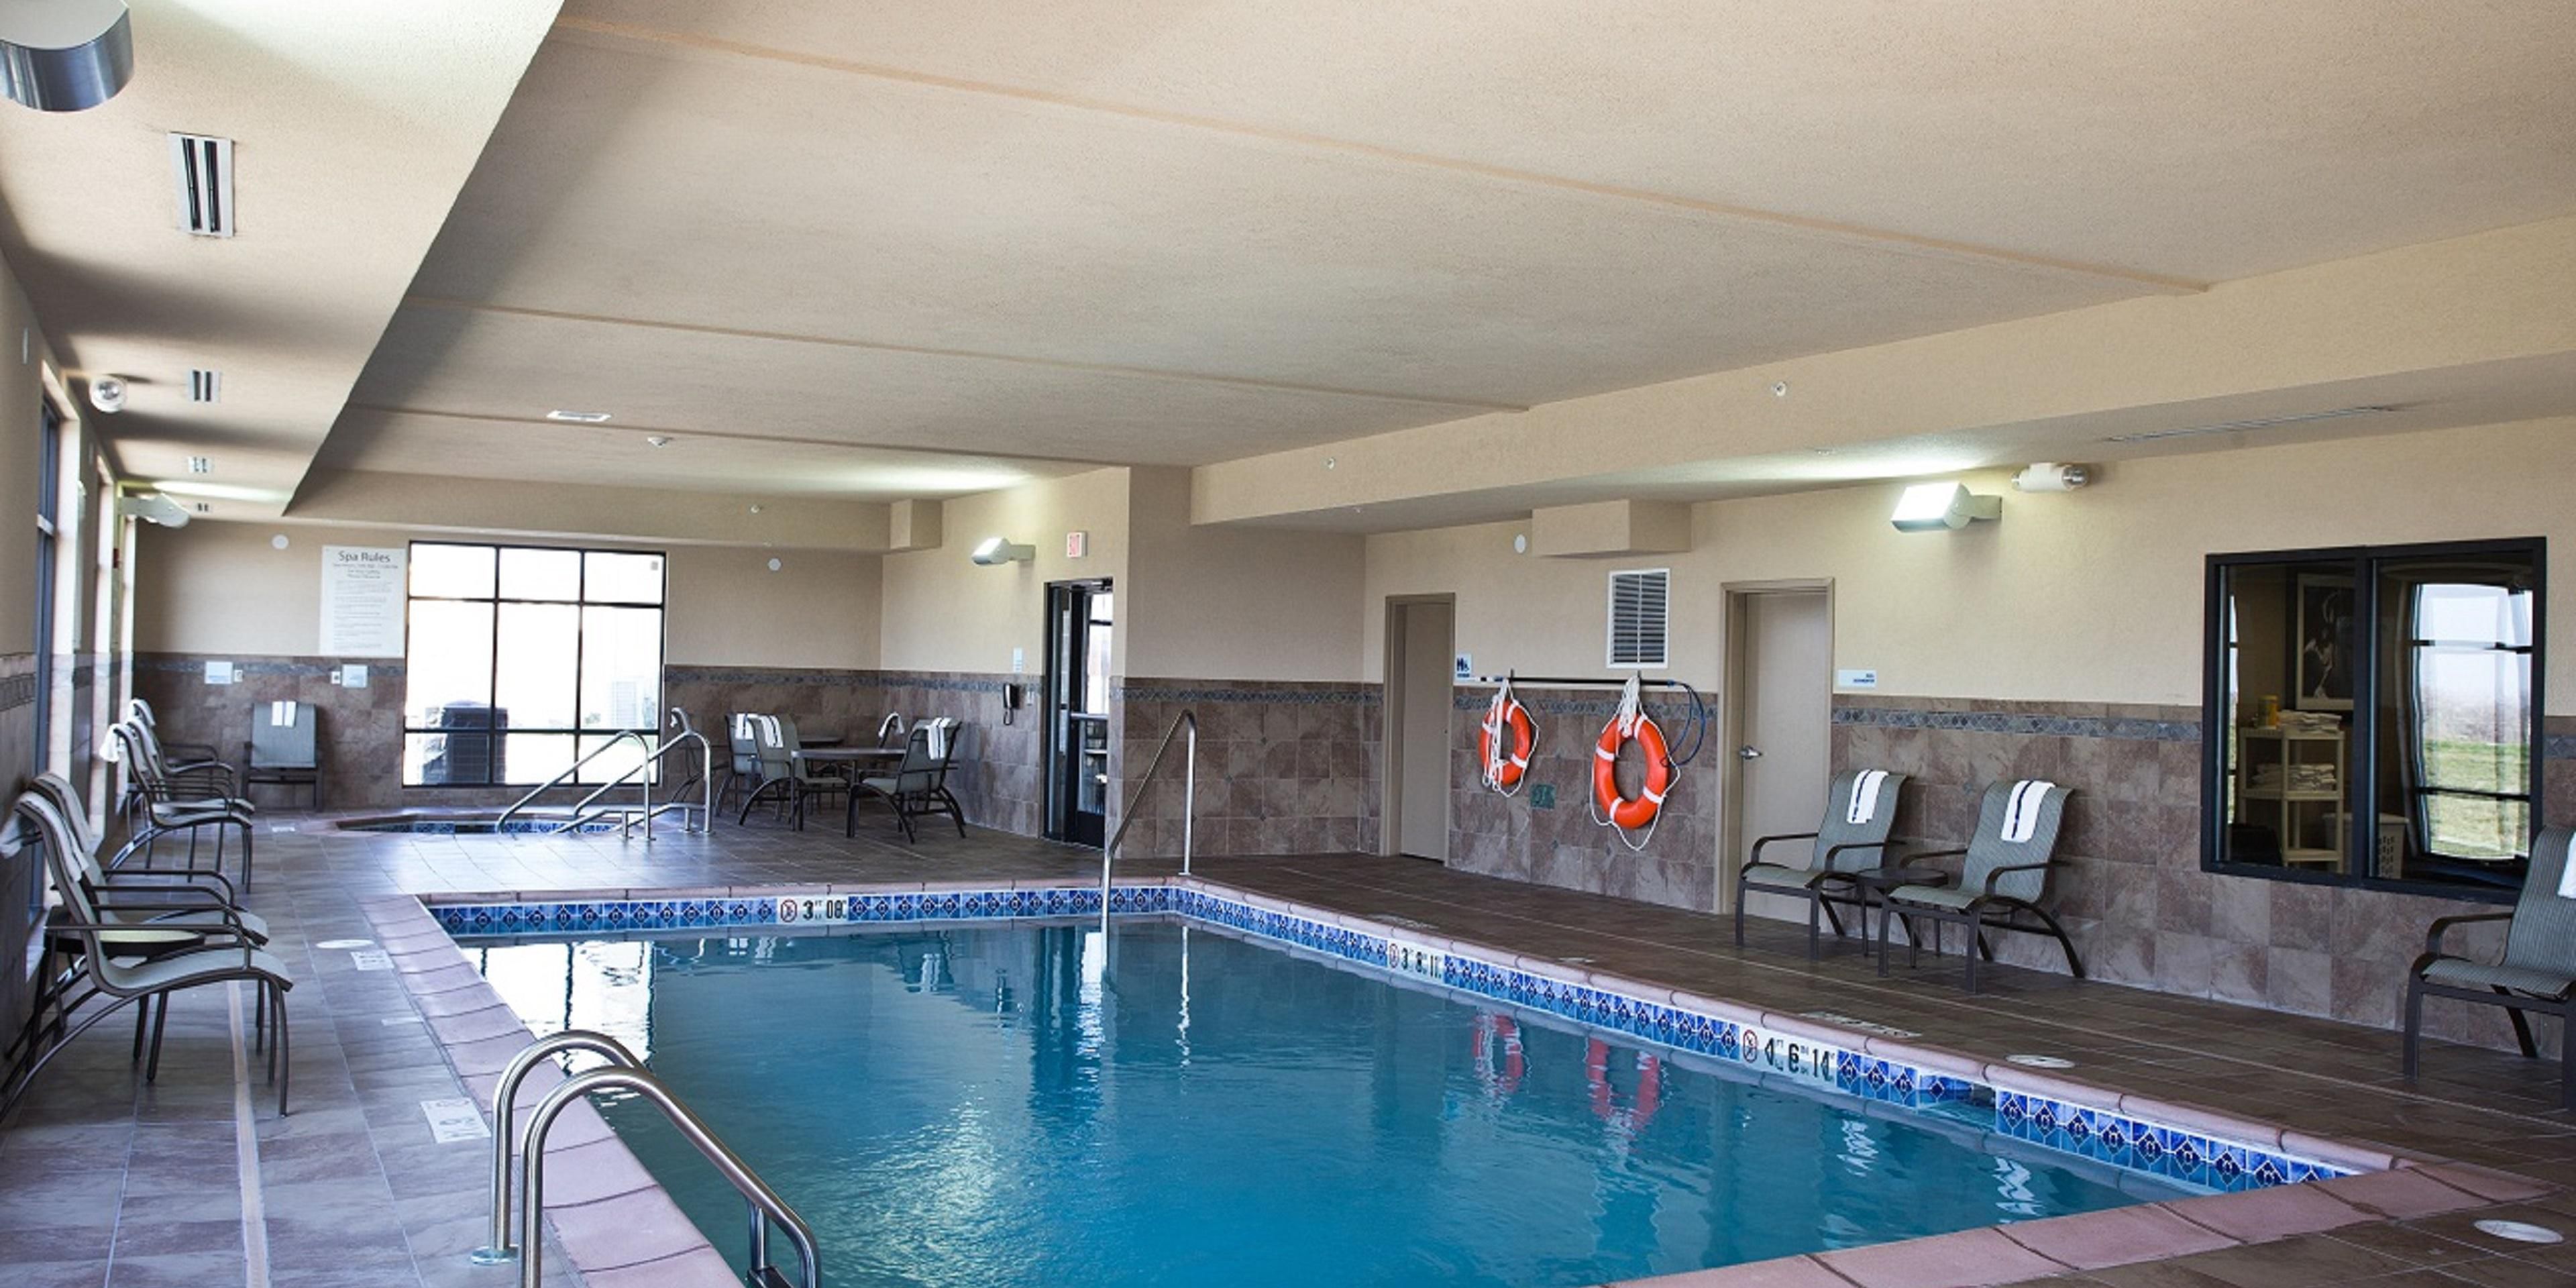 Rain or shine, you can always take a dip in our heated indoor pool. After a busy day, grab a towel and unwind beside our sparkling, inviting pool or relax in the whirlpool.